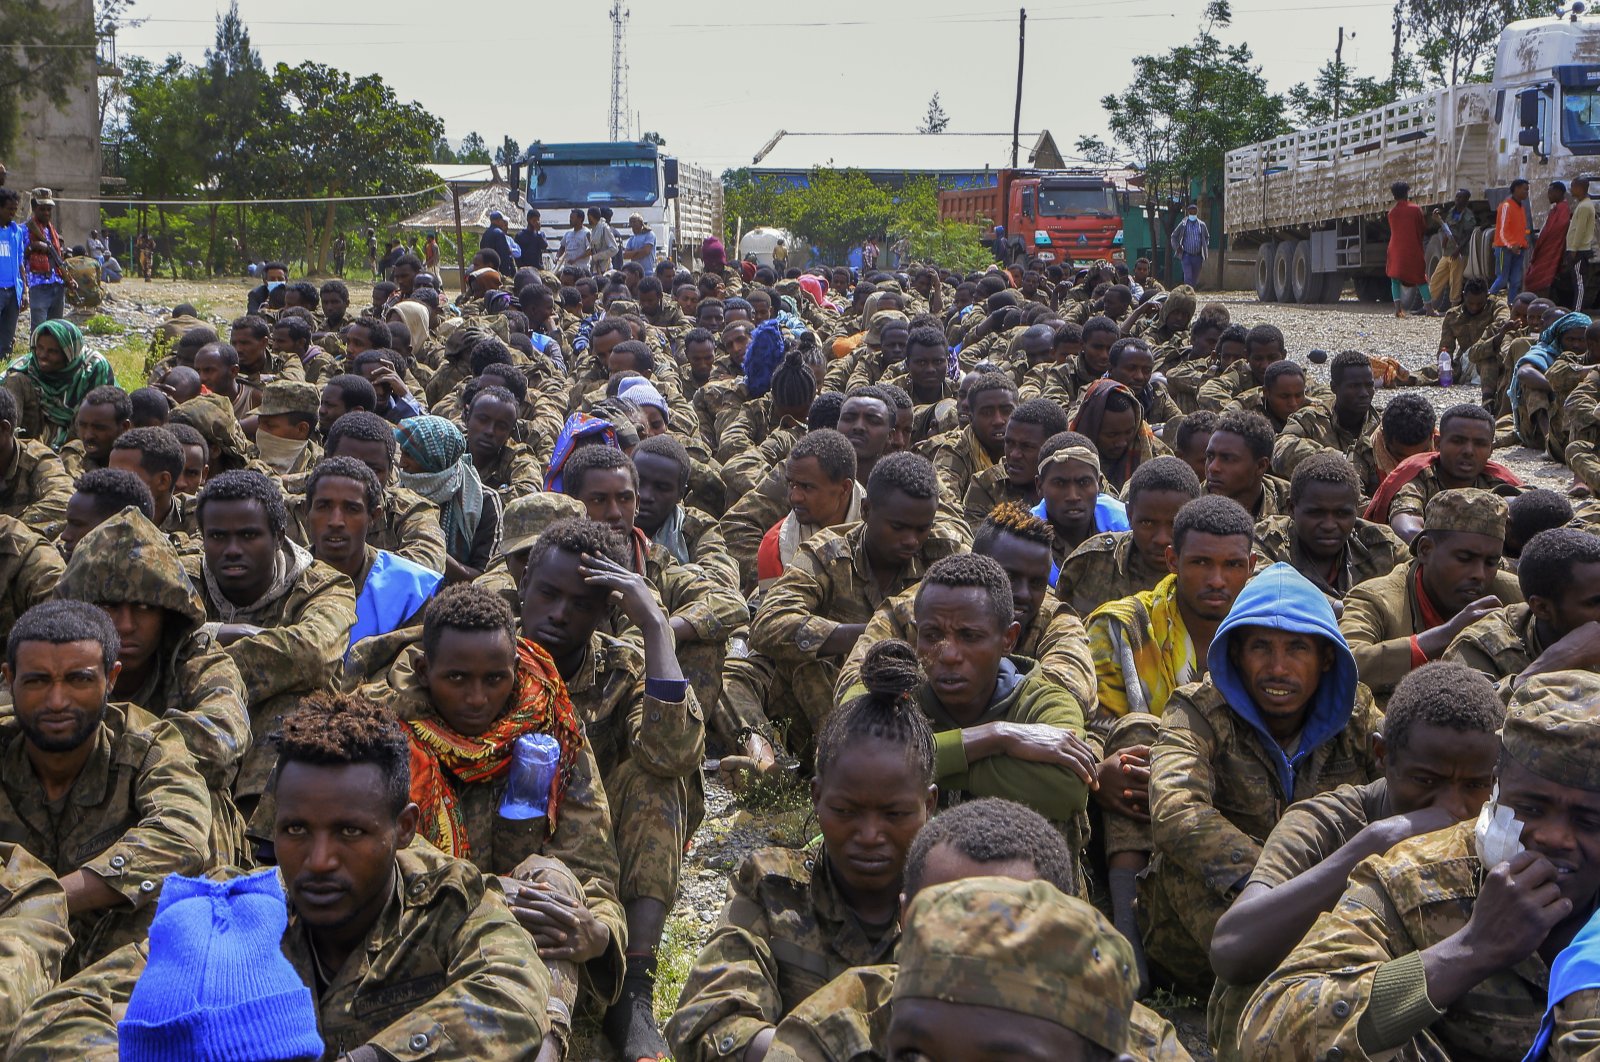 Captured Ethiopian government soldiers and allied militia members sit in rows after being paraded by Tigray forces through the streets in open-top trucks, as they arrived to be taken to a detention center in Mekele, the capital of the Tigray region of northern Ethiopia, Oct. 22, 2021. (AP Photo)